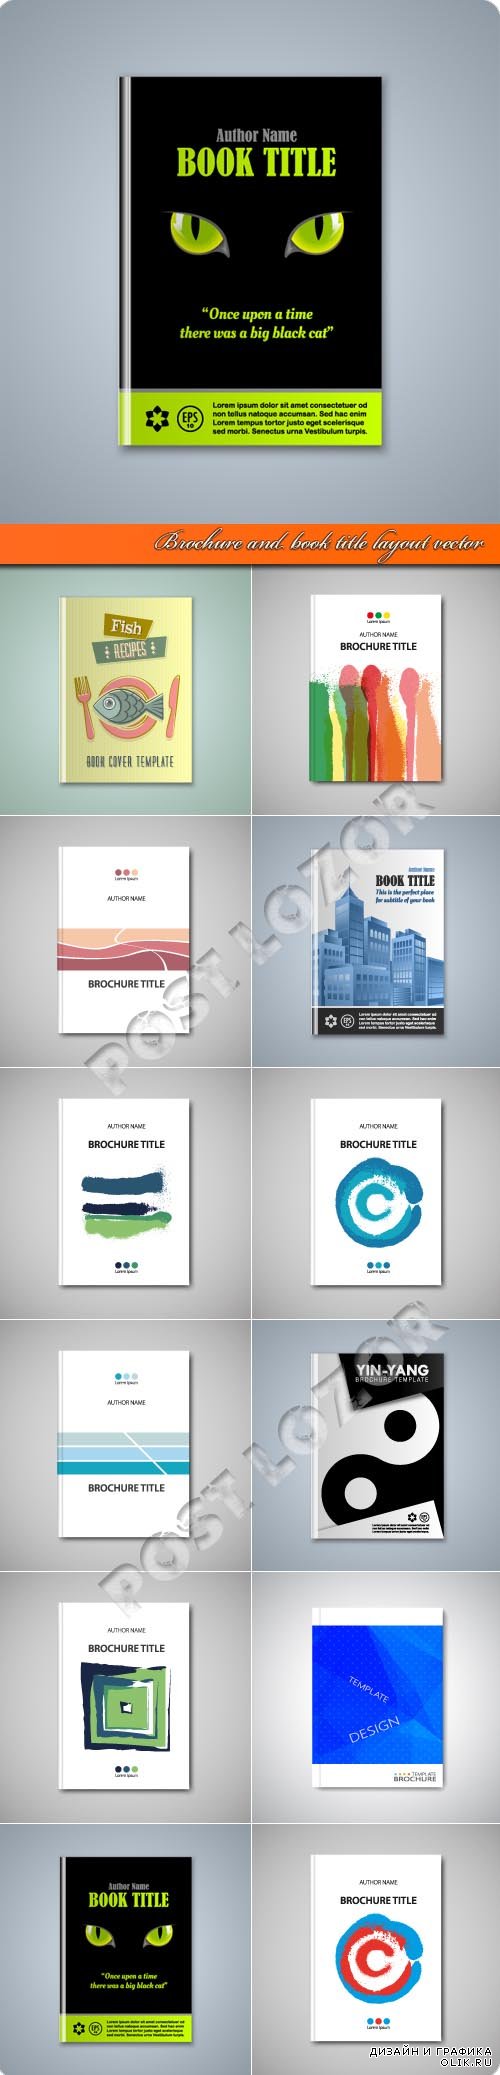 Brochure and book title layout vector